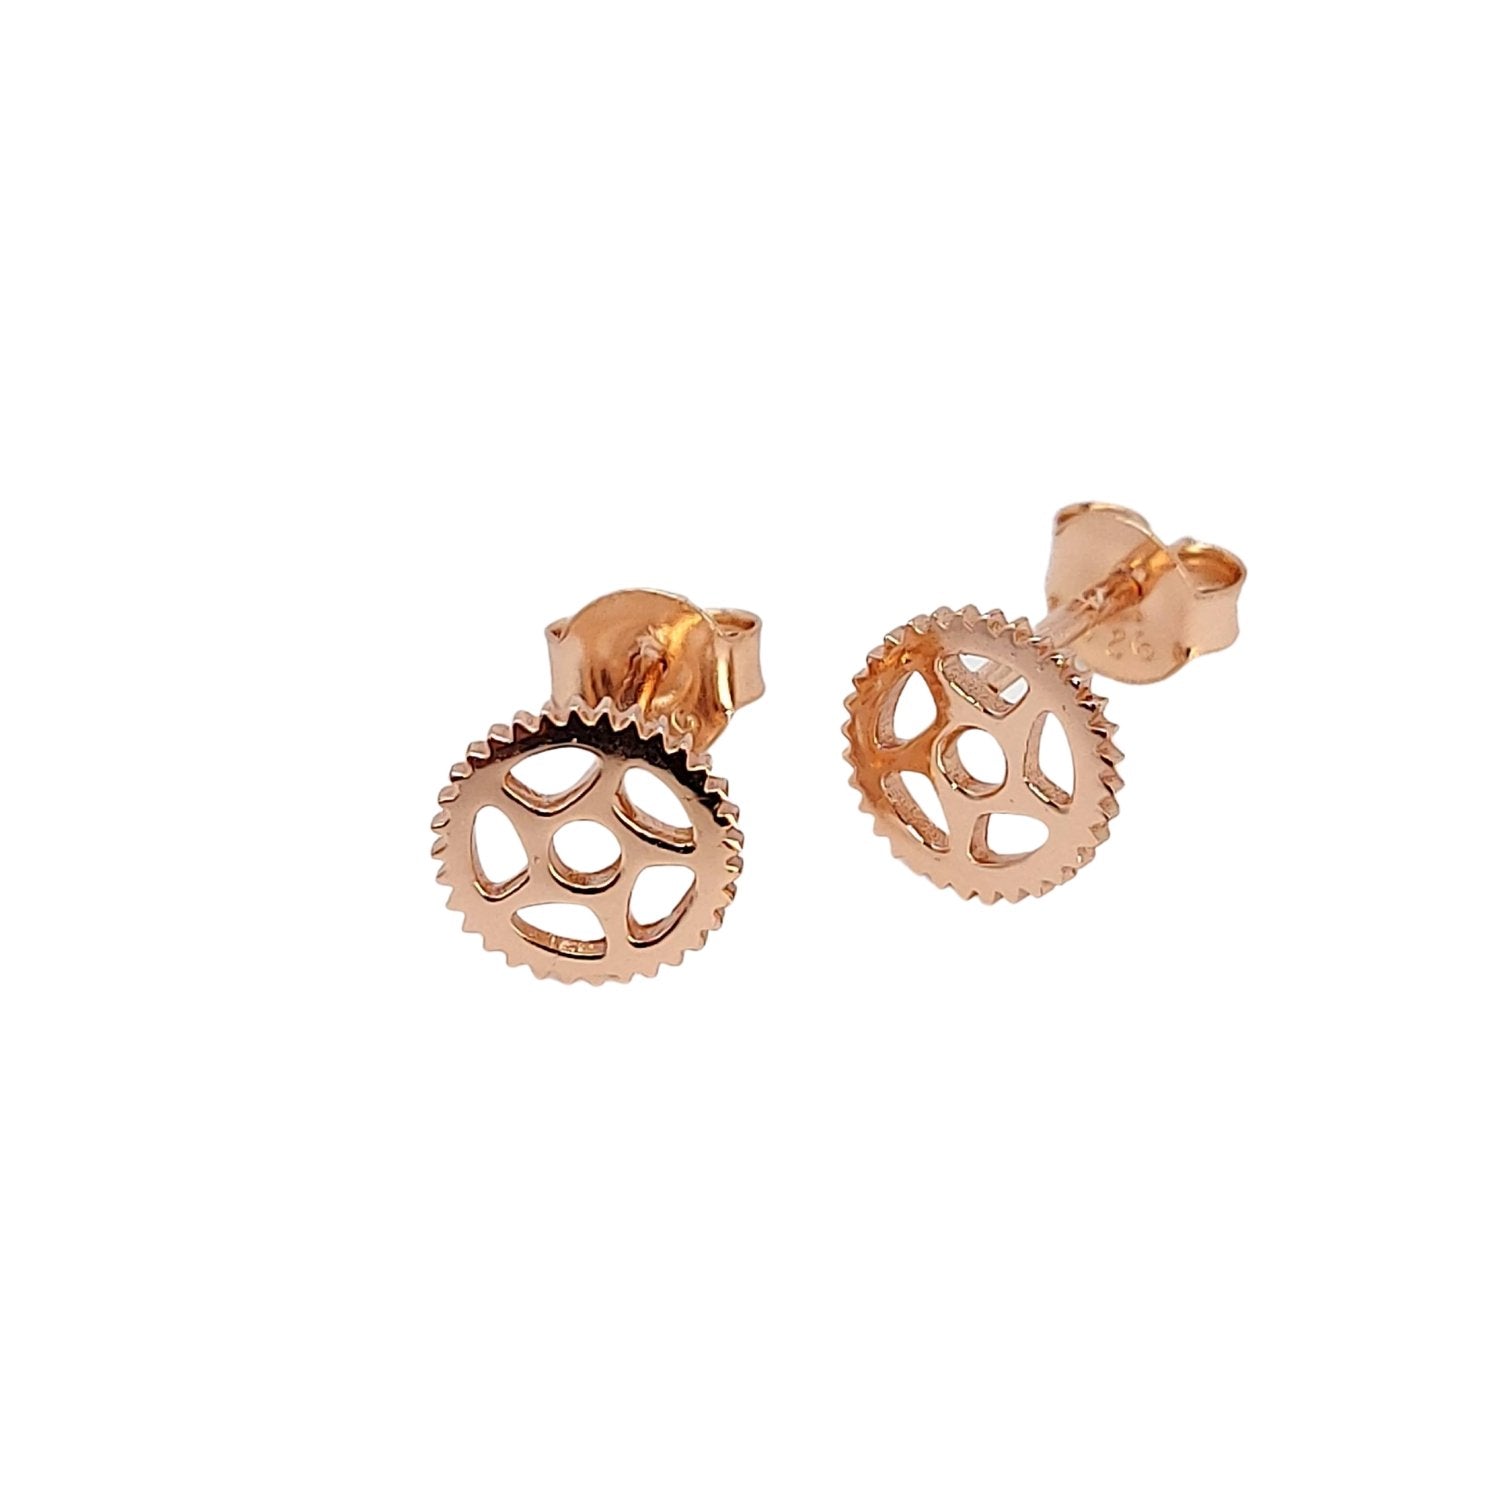 18k rose gold bike cog stud earrings with white background